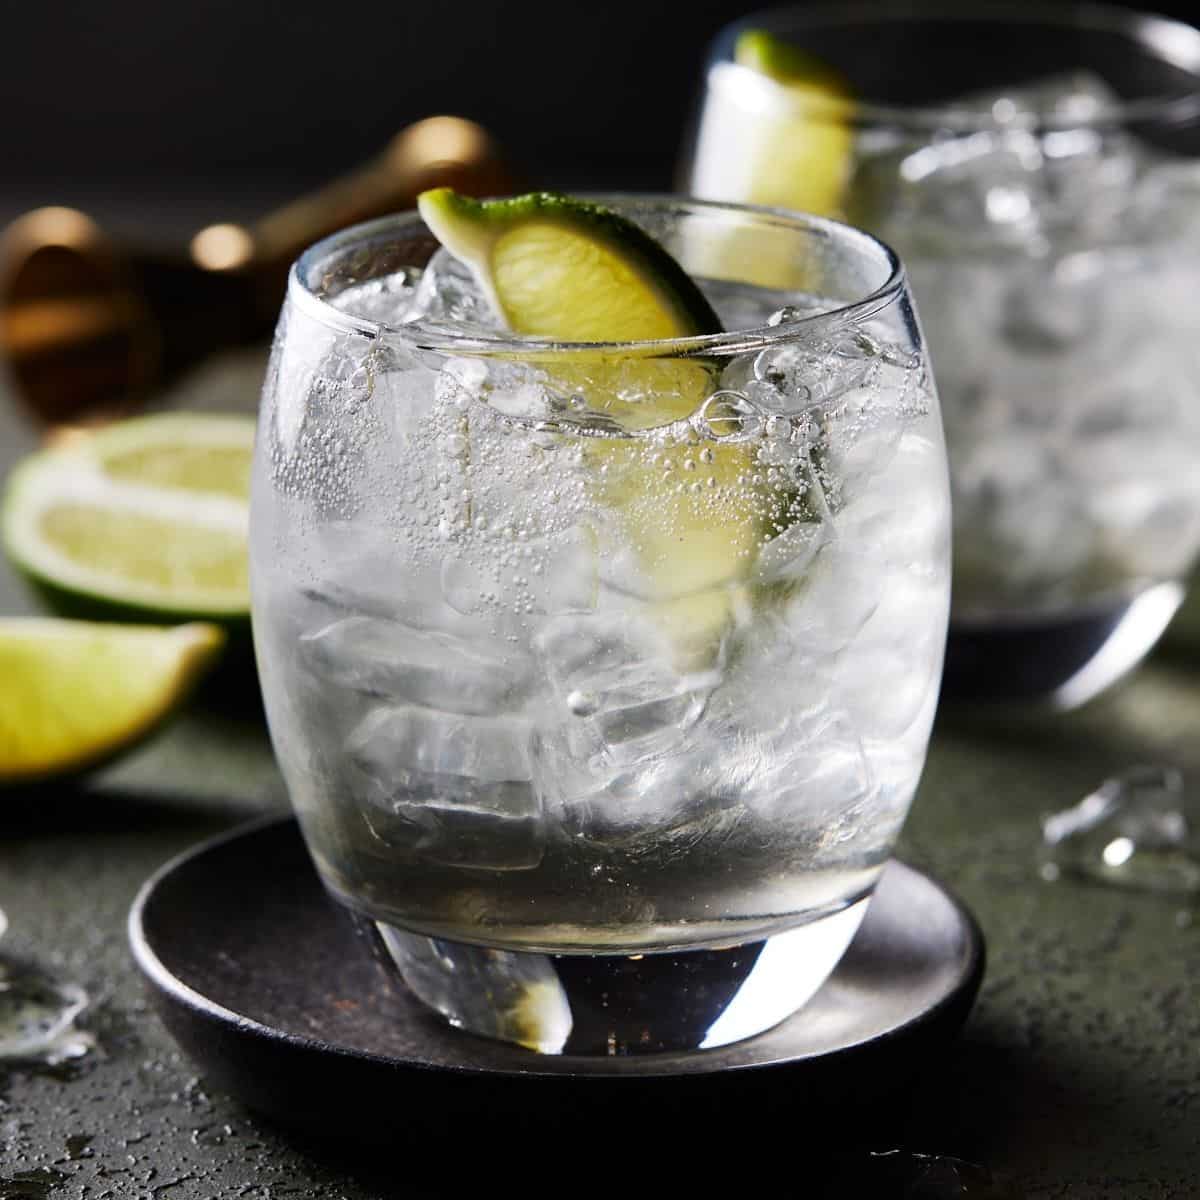 Gin and Tonic: How to Make the Best G&T